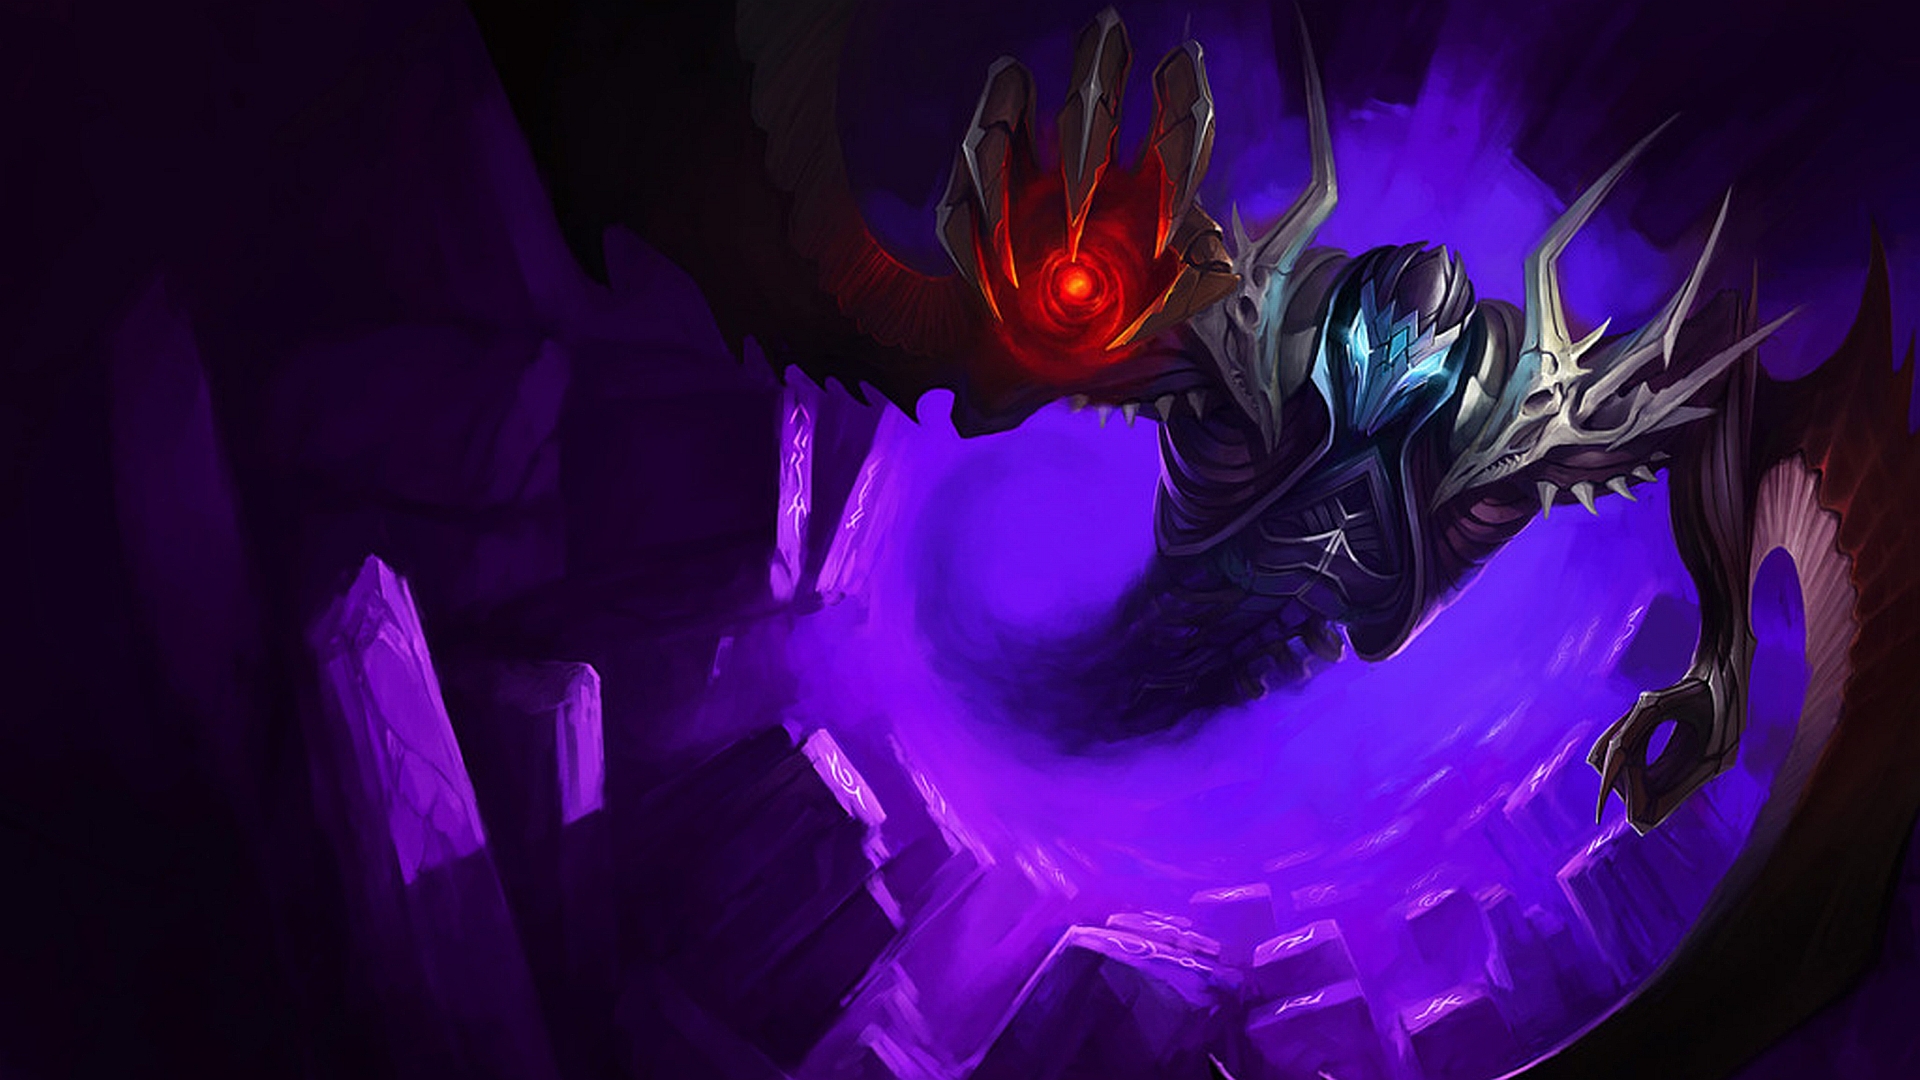 League of Legends Nocturne, the fearsome champion ready to unleash darkness and dominate the battlefield.